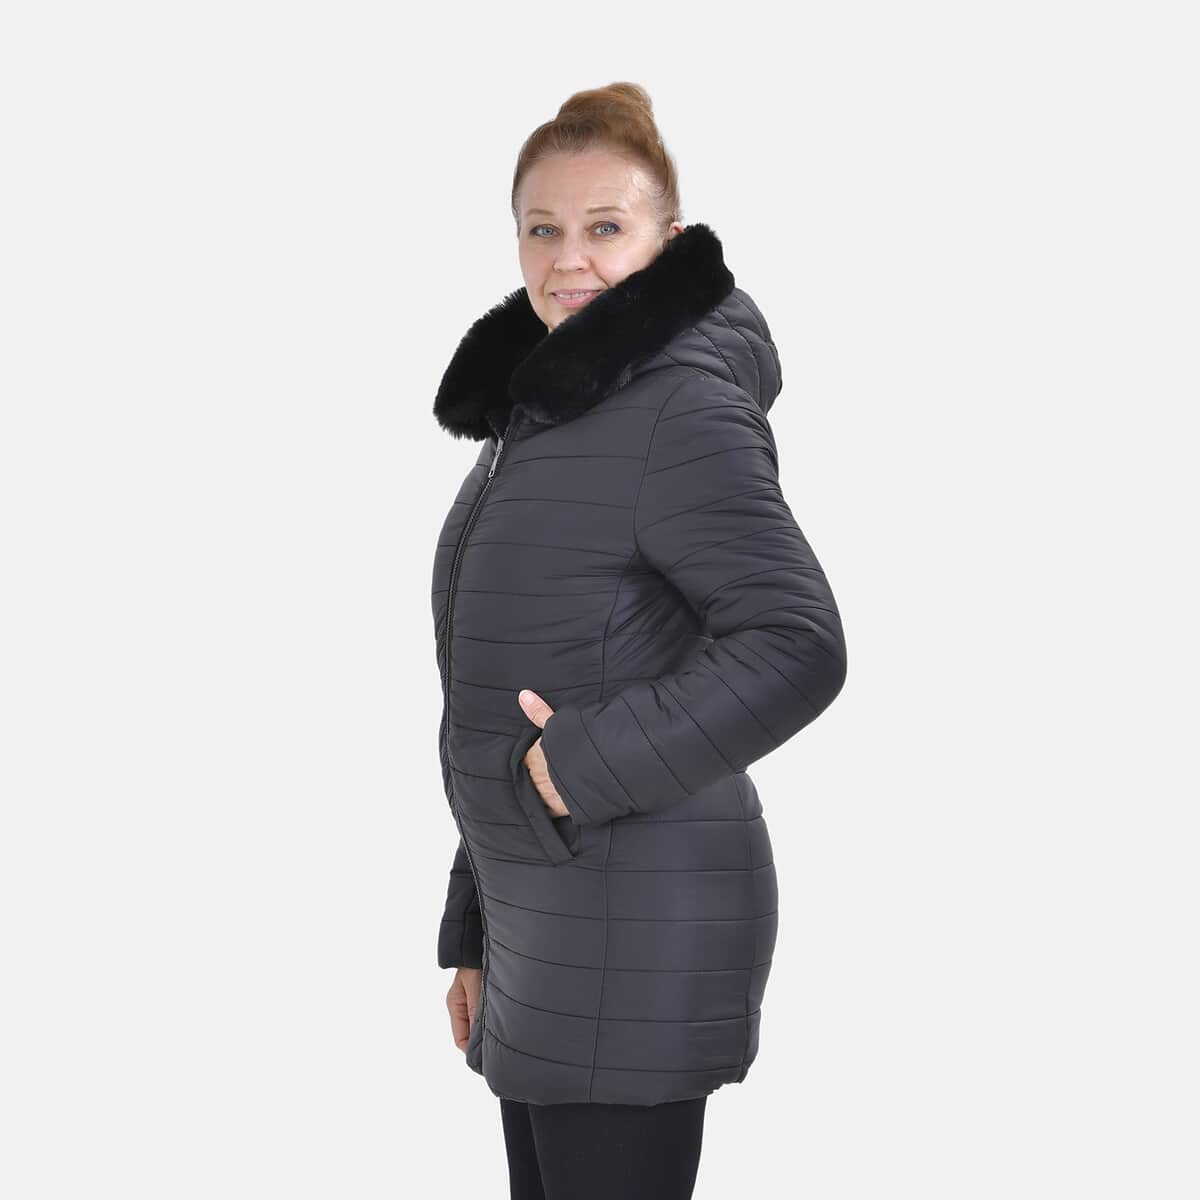 Tamsy Black Reversible Faux Fur and Puffer Jacket with Hood - L image number 2